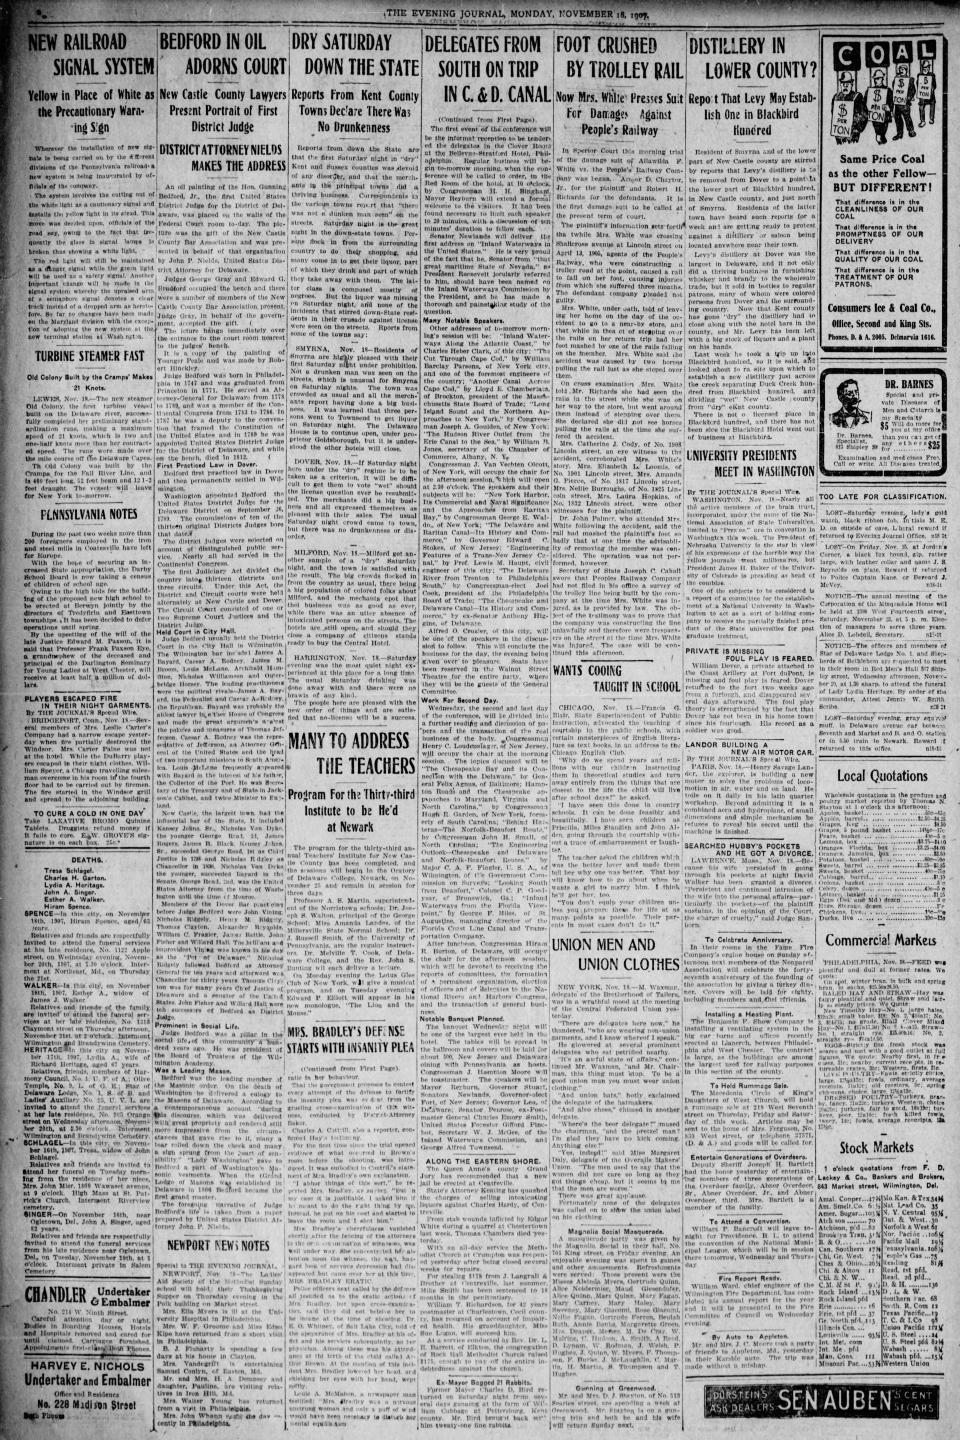 Page 2 of The Evening Journal from Nov. 18, 1907.